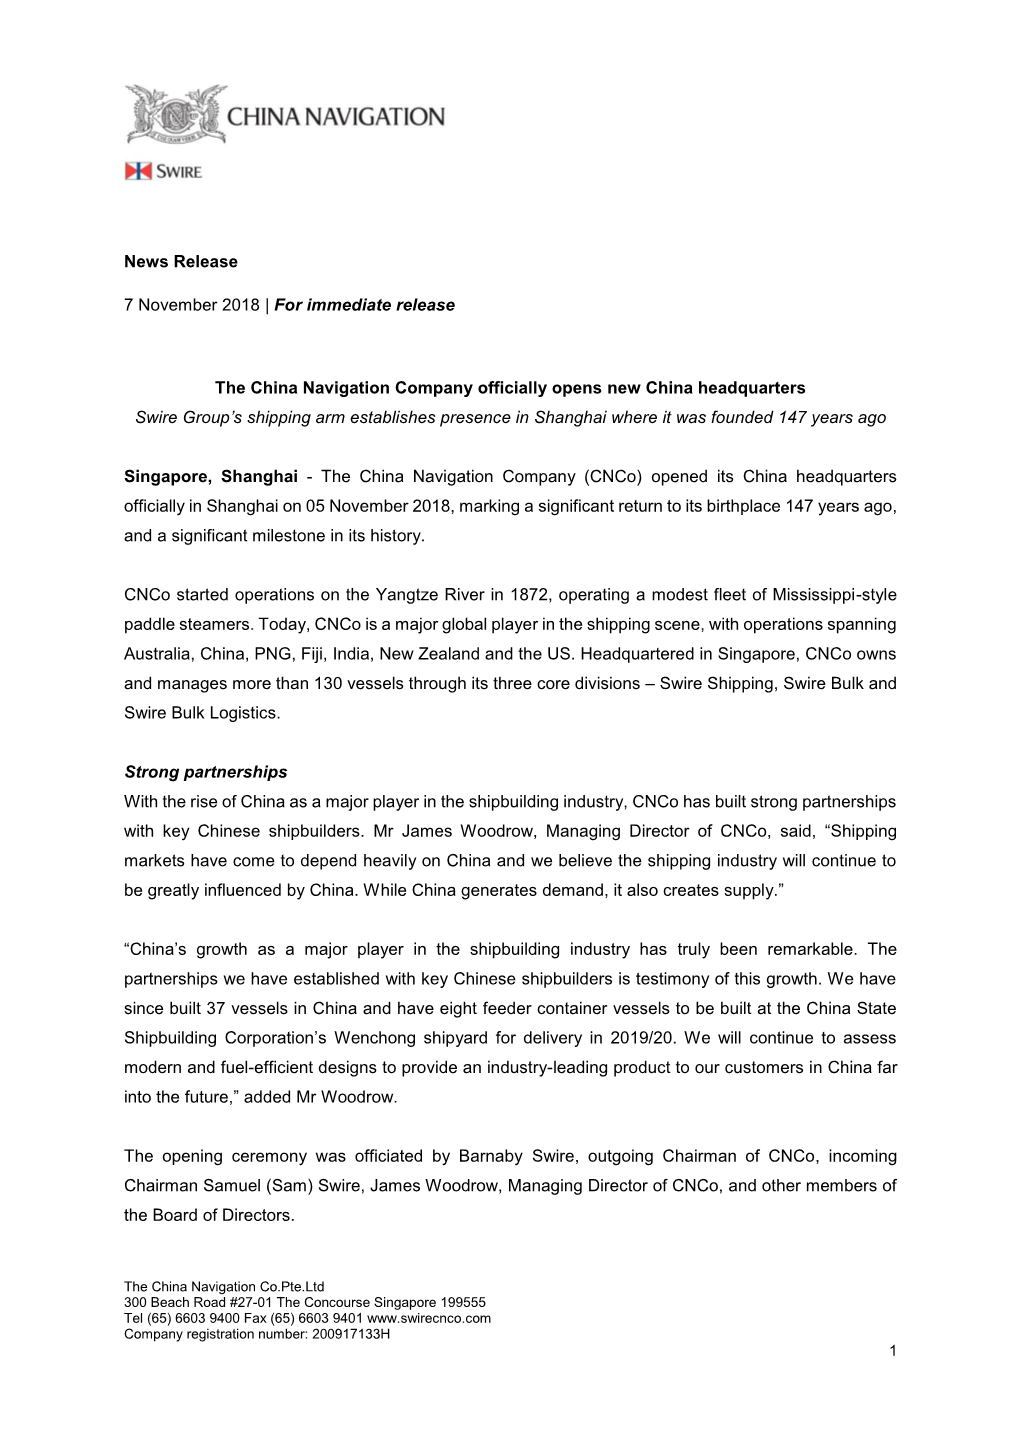 For Immediate Release the China Navigation Company Officially